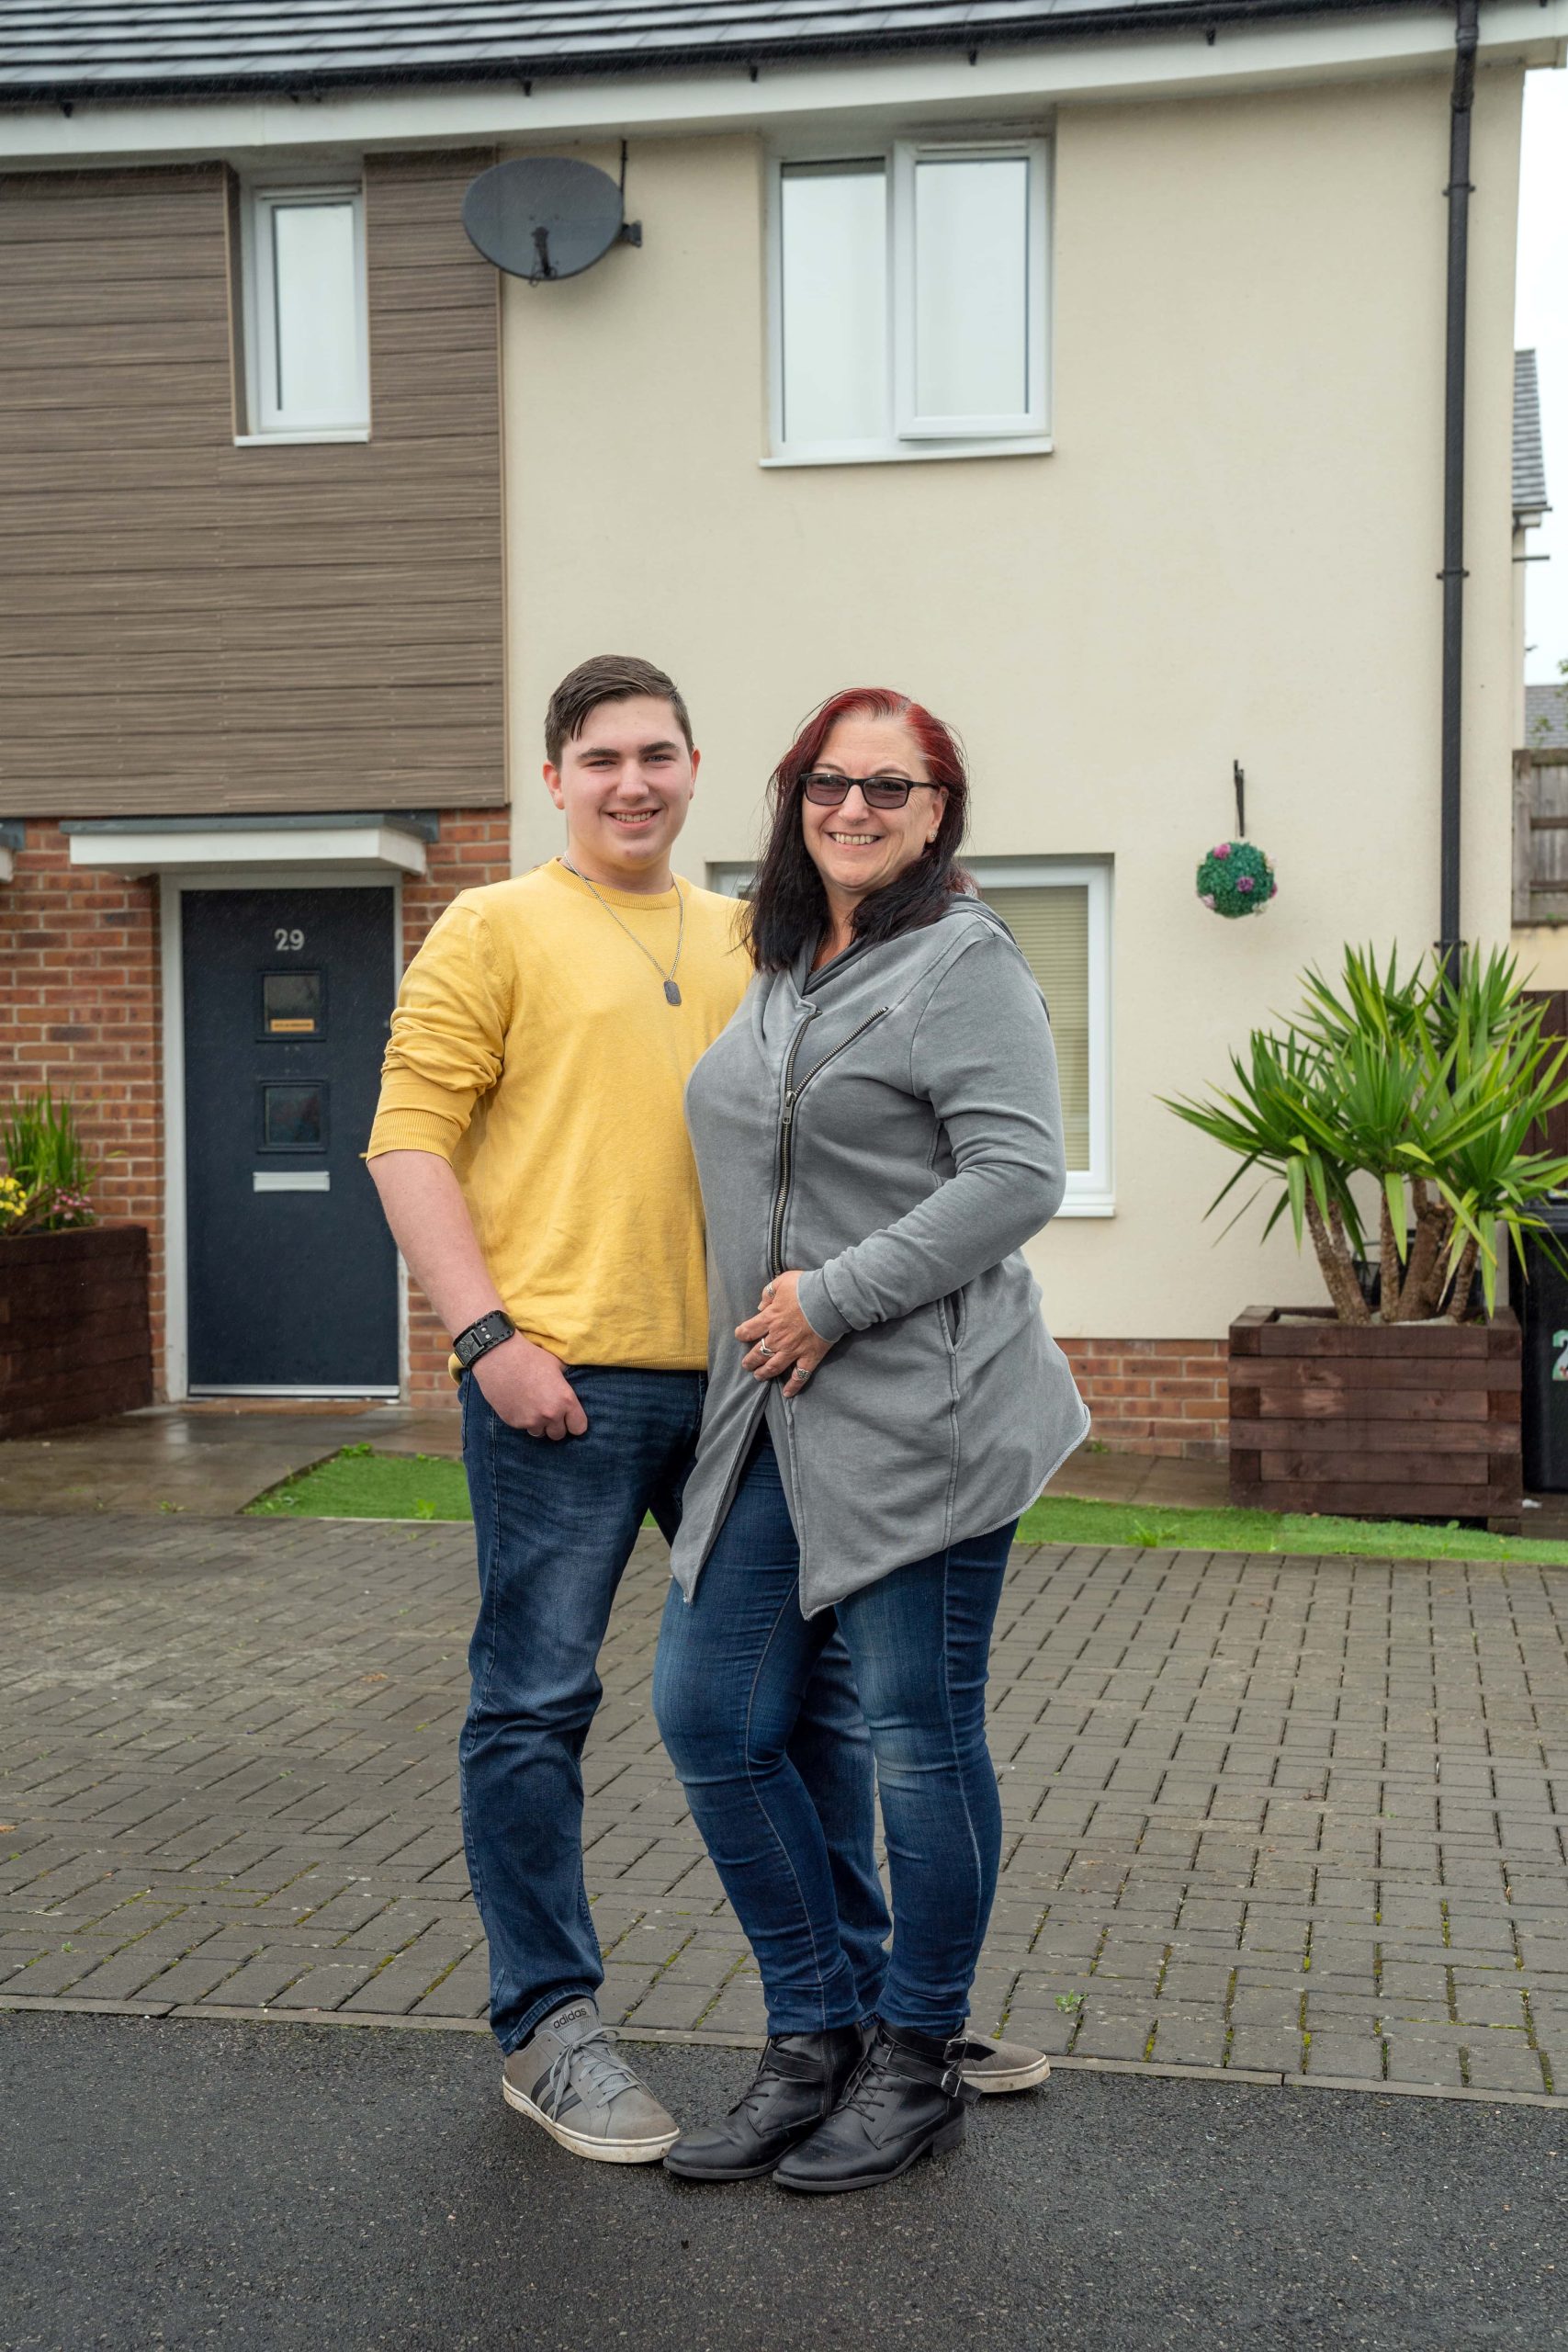 Trivallis Housing Landlord Wales A woman and a younger male companion, possibly her son, are standing together in front of a Trivallis housing property with the visible house number 29 on a cloudy day. Both are smiling and